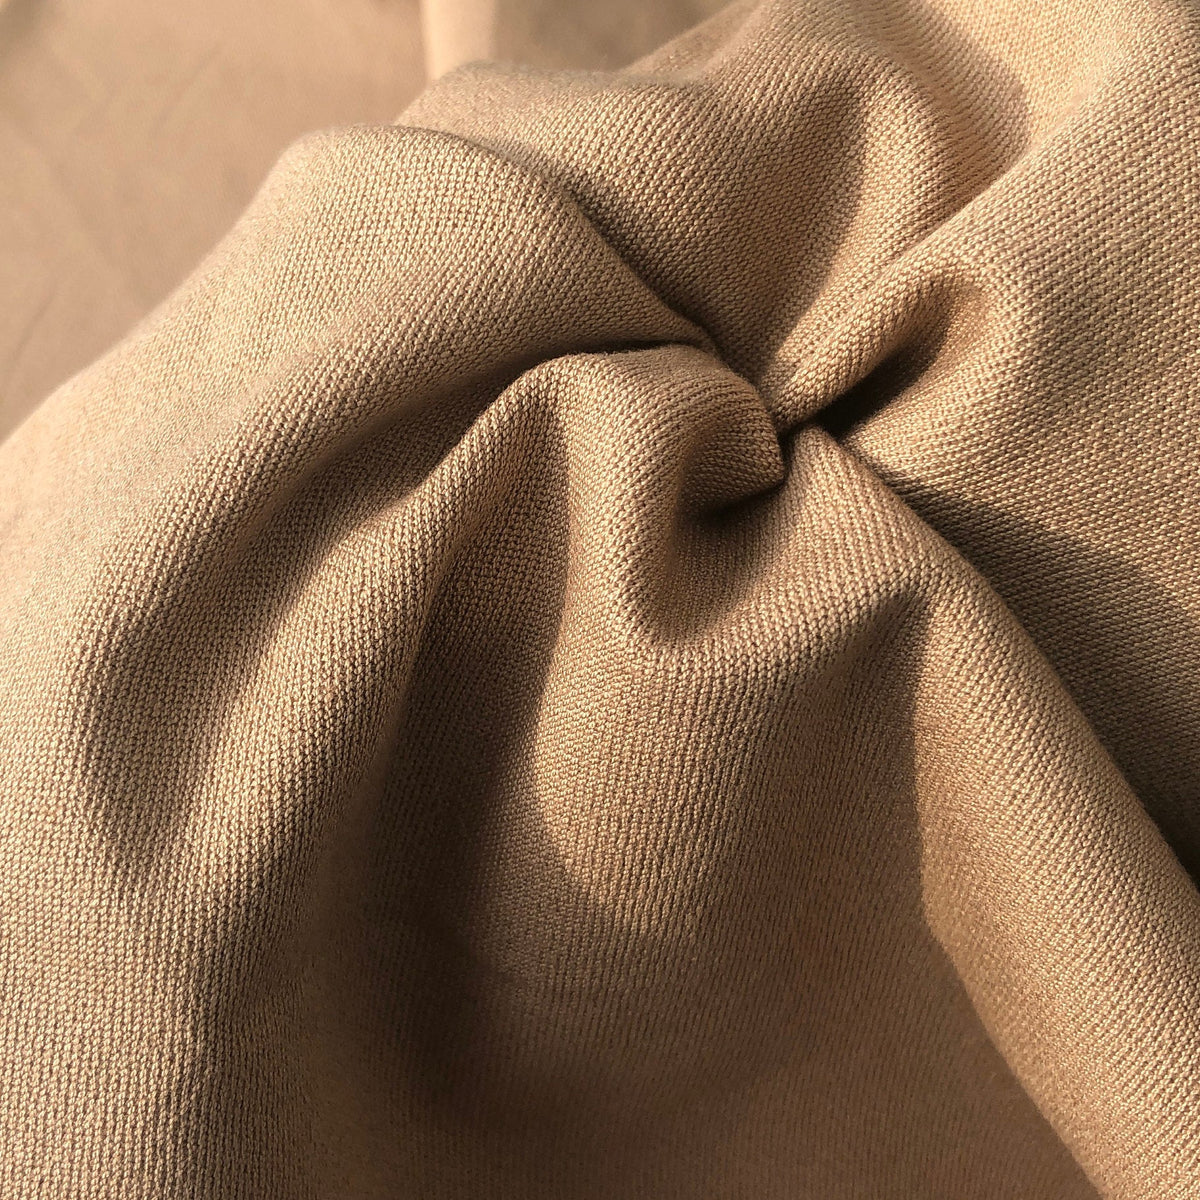  Stone Cotton Twill Spandex Fabric by The Yard 4 Way Stretch  (Chino Material) : Arts, Crafts & Sewing